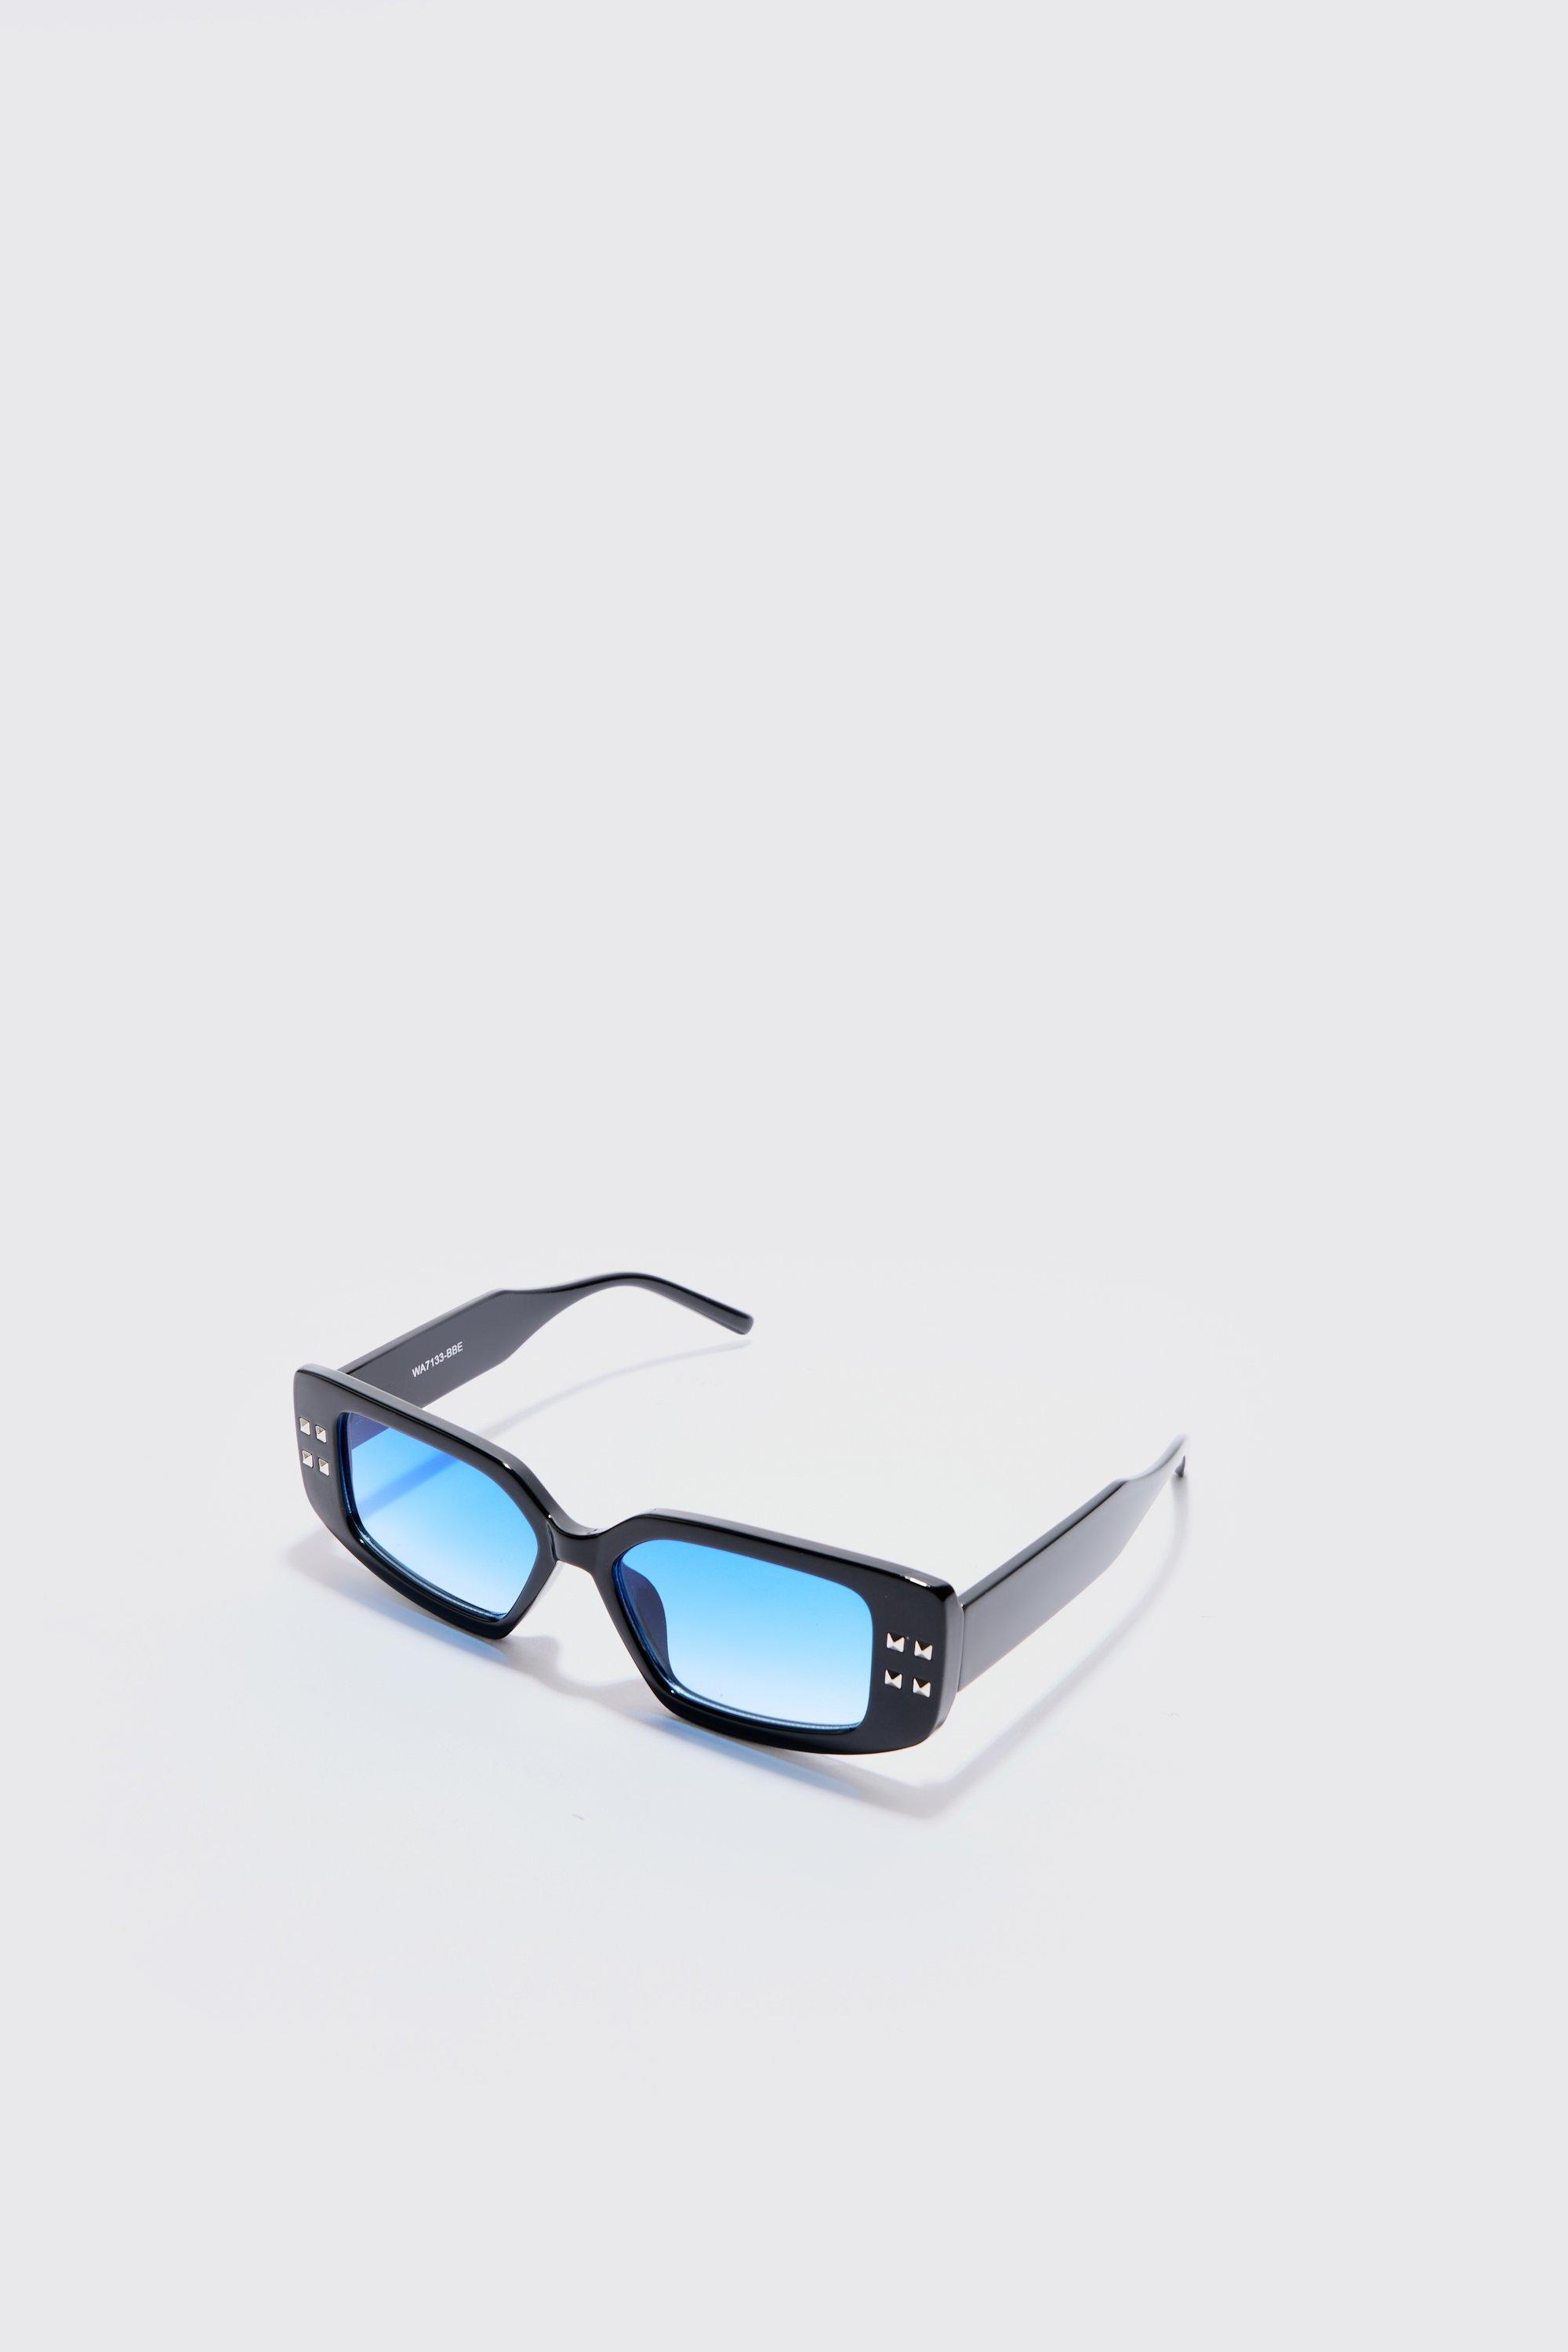 Image of Chunky Rectangle Sunglasses With Blue Lens In Black, Nero